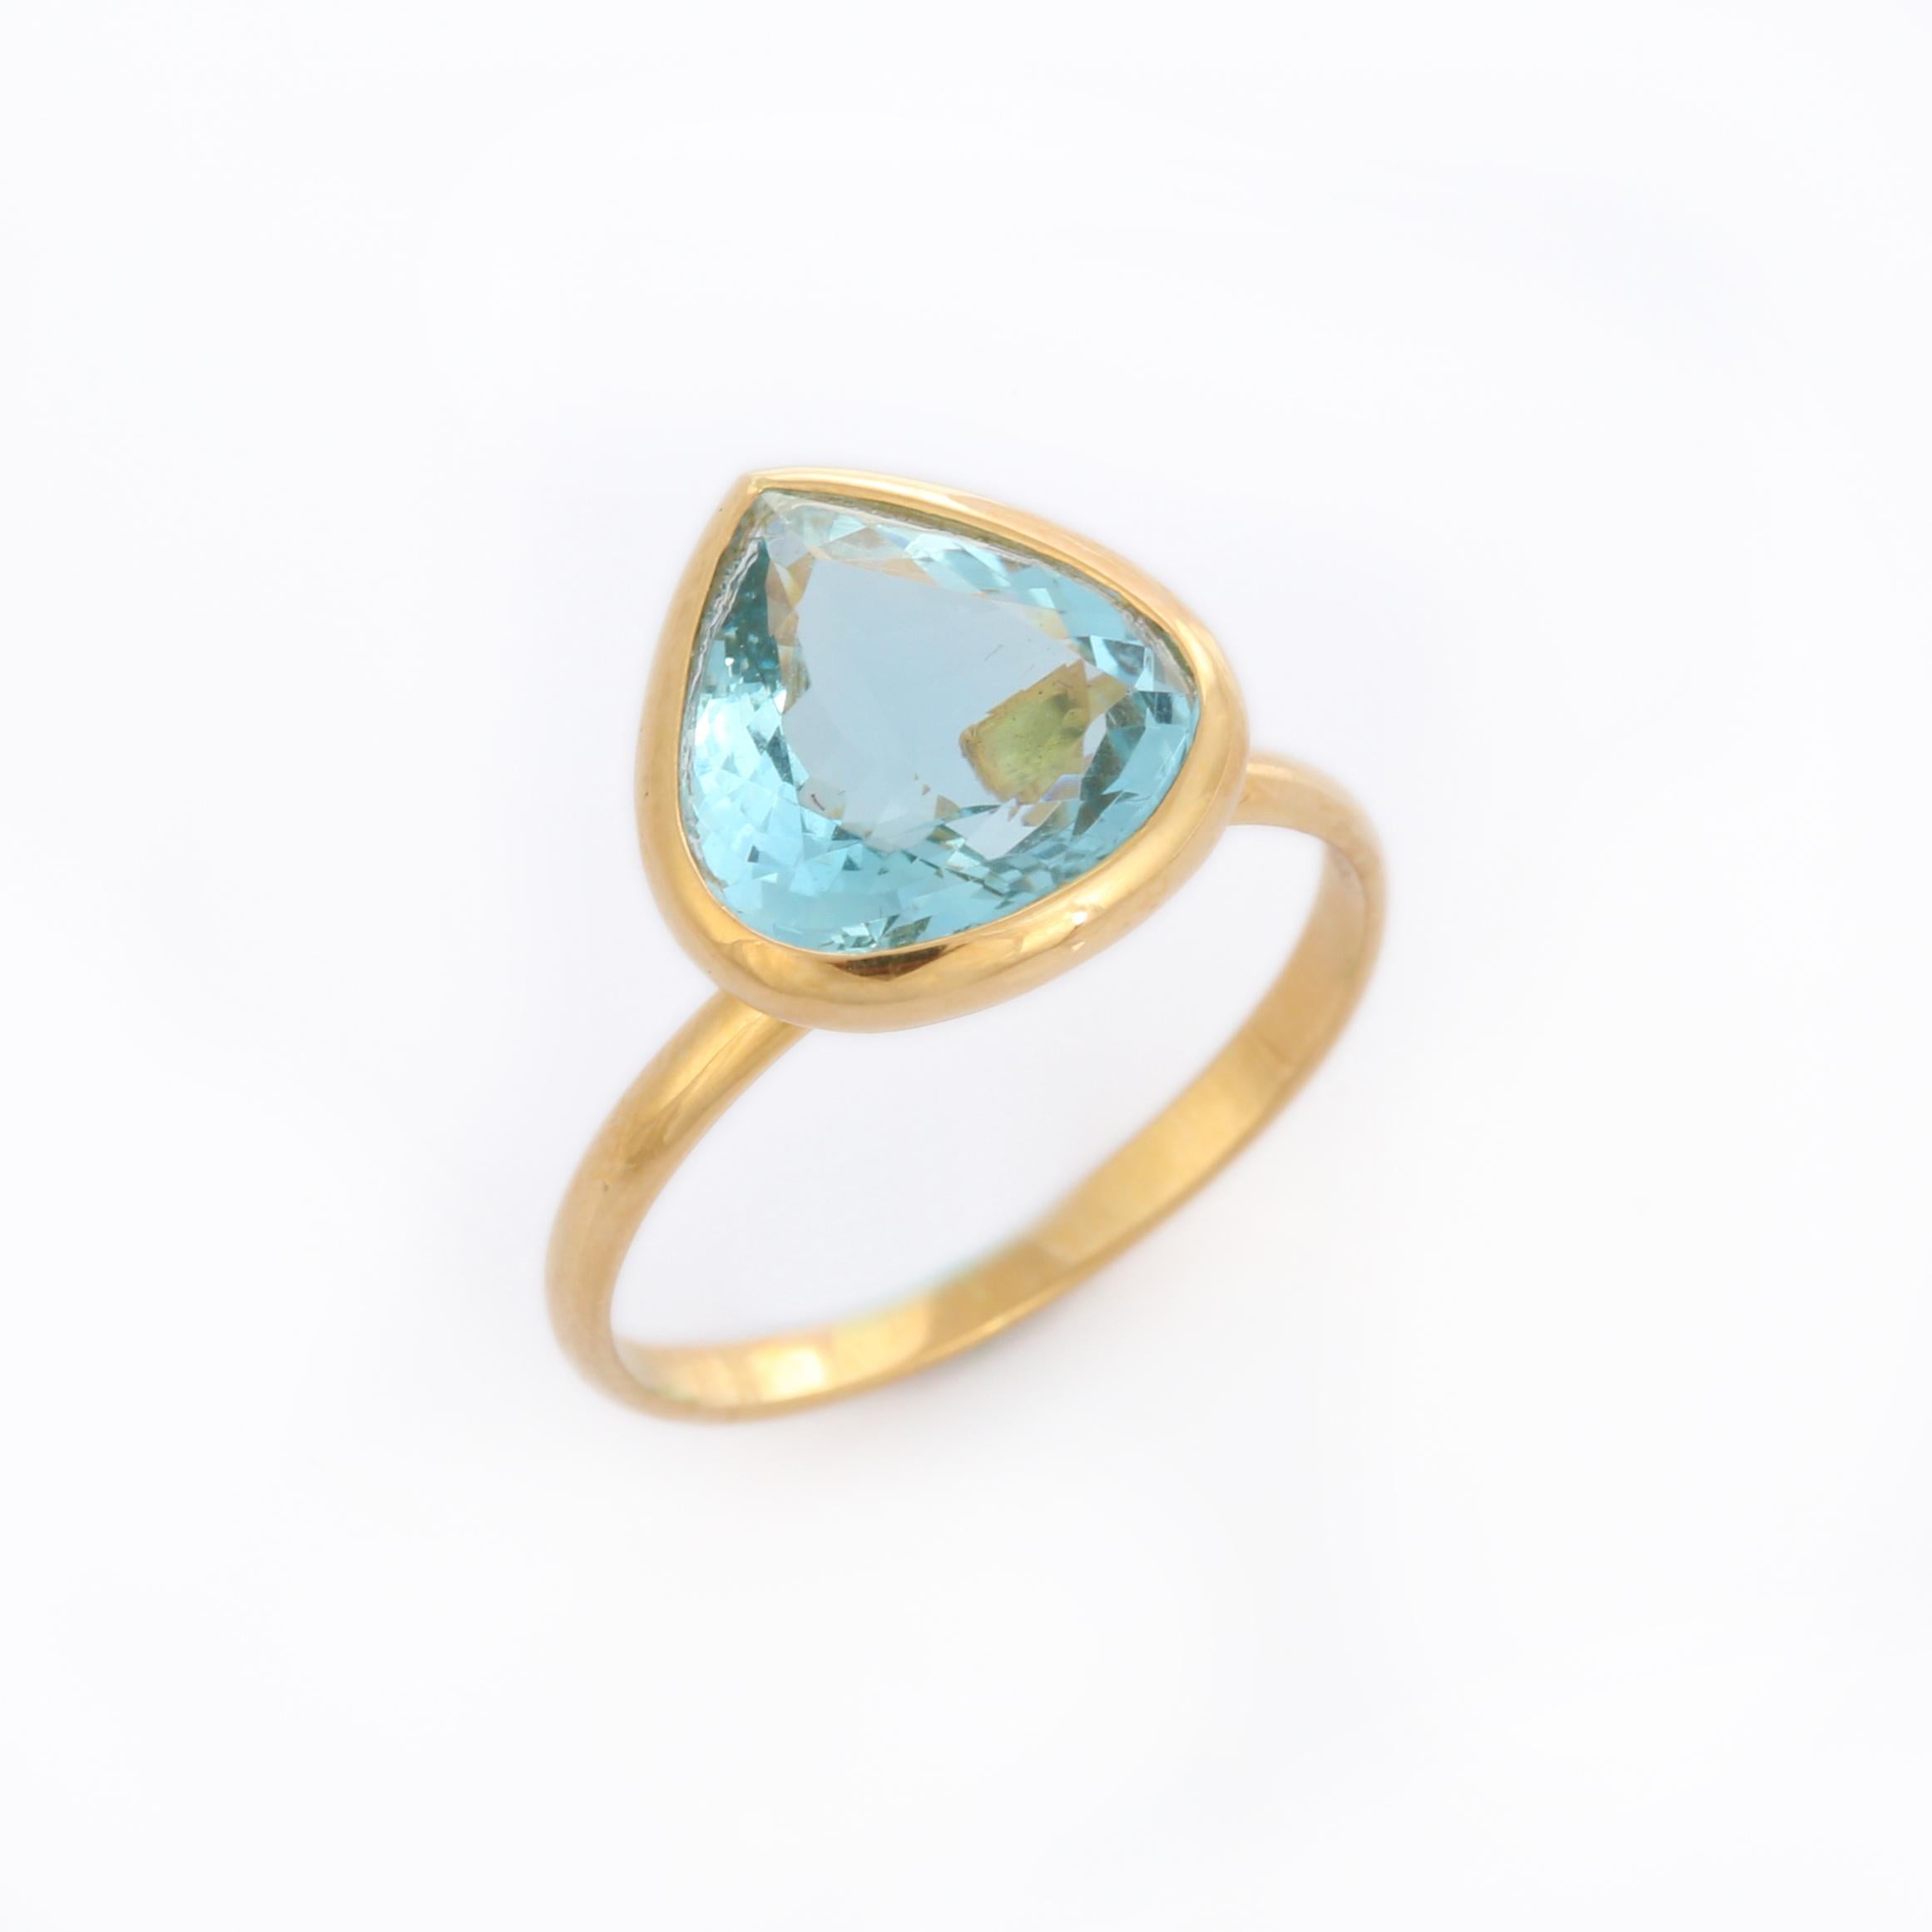 For Sale:  18K Yellow Gold Pear Cut Aquamarine Solitaire Ring 9